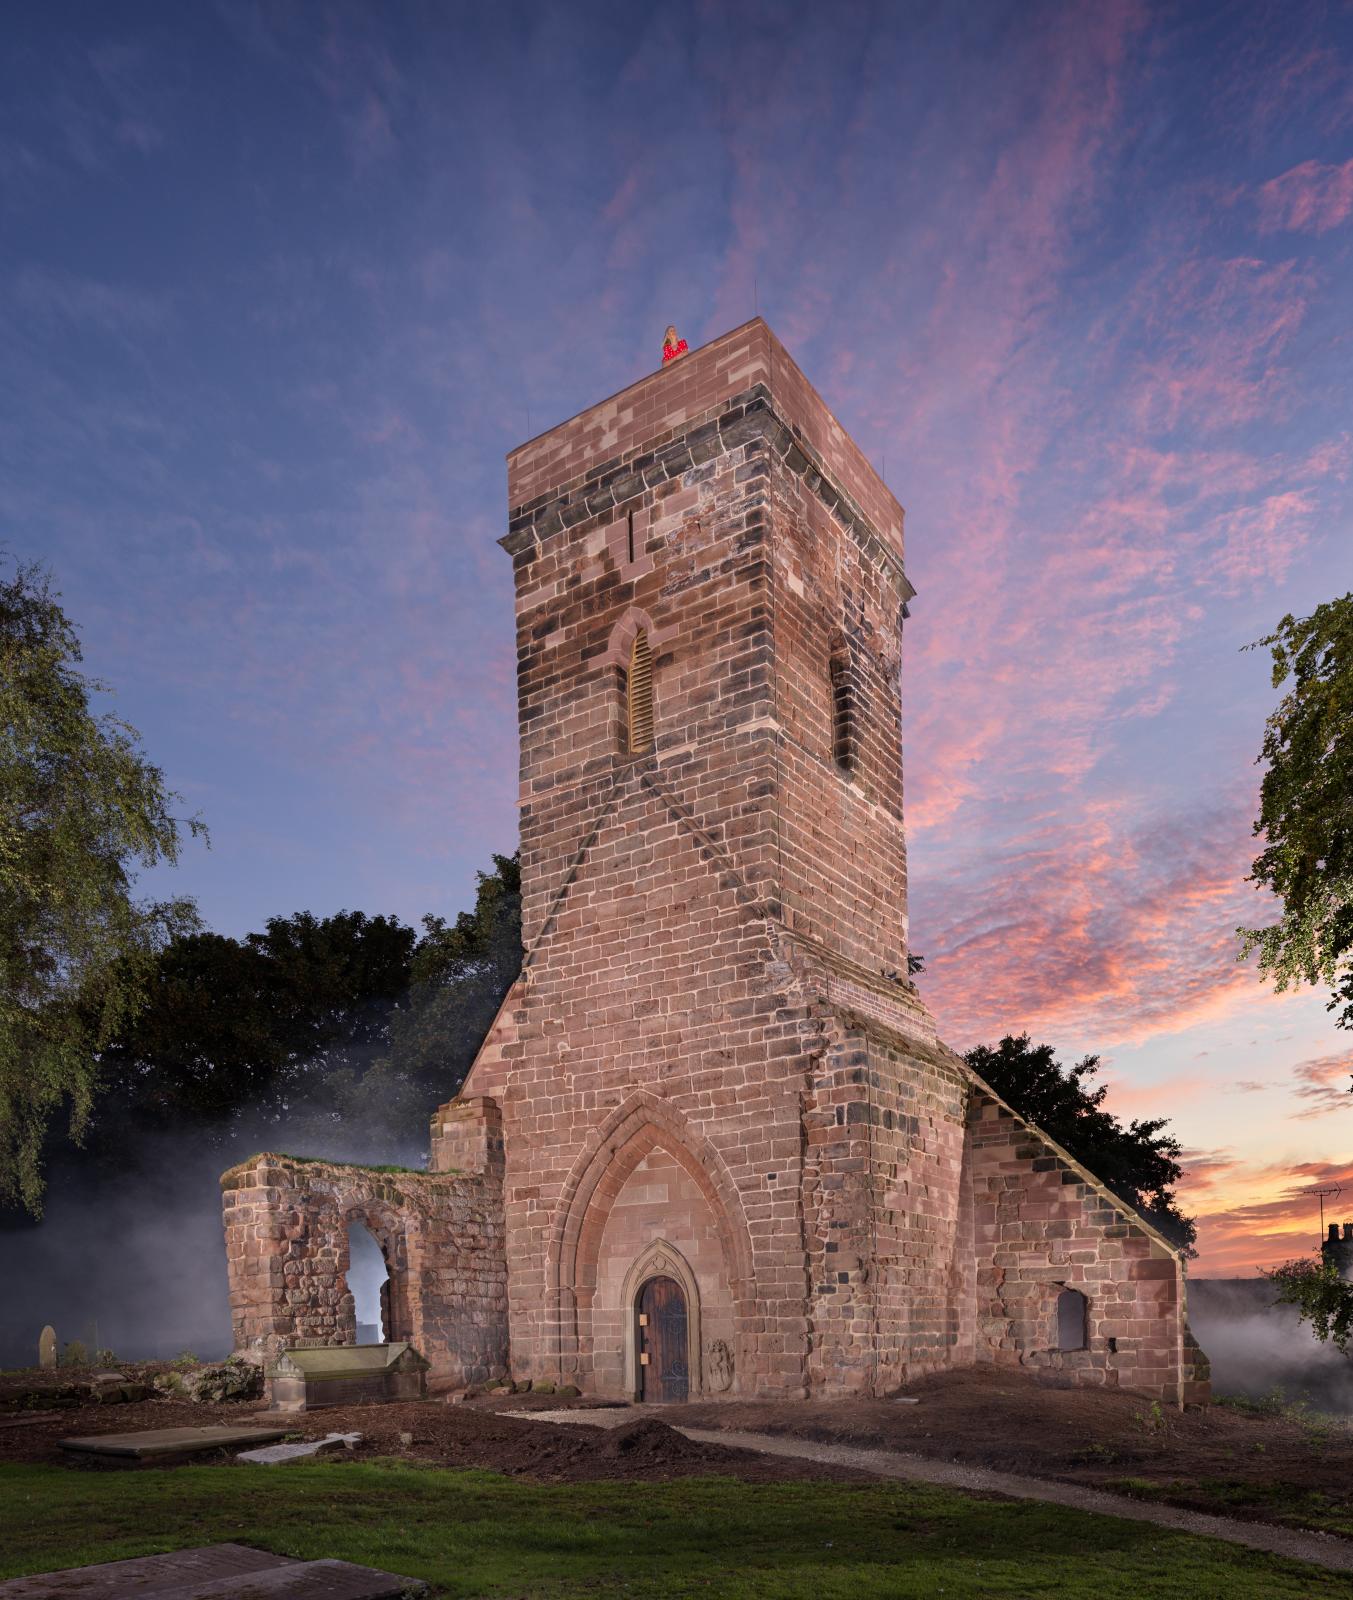 The stone tower of a ruined church against a vivid sunset. A person in a red jacket stands at the top.